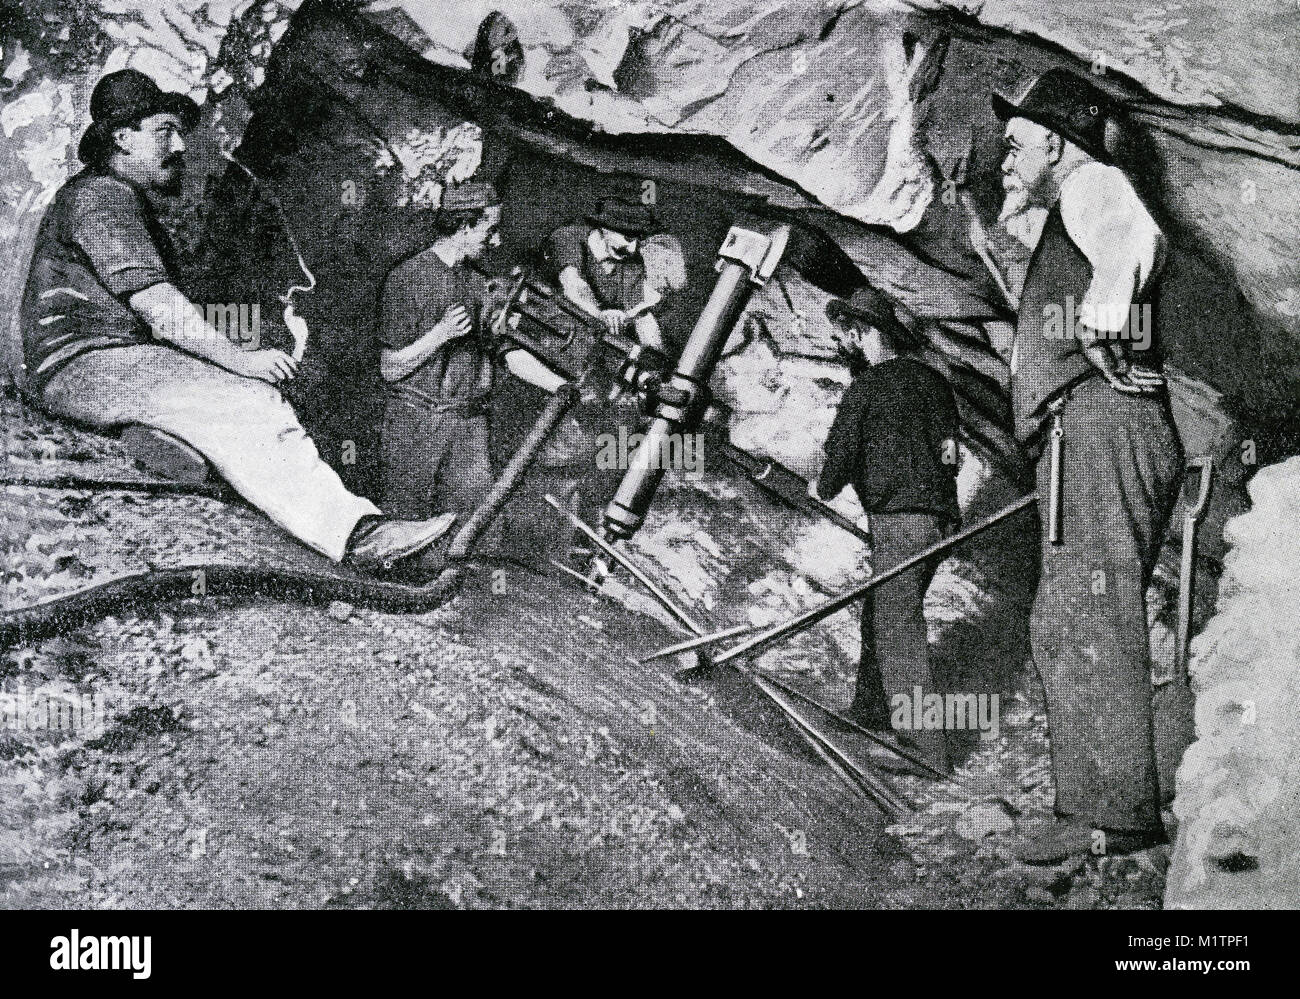 Halftone illustration of gold miners working 4154 feet below the surface in a South African mine, circa 1900. From an original image in How Other People Live by H. Clive Barnard, 1918. Stock Photo